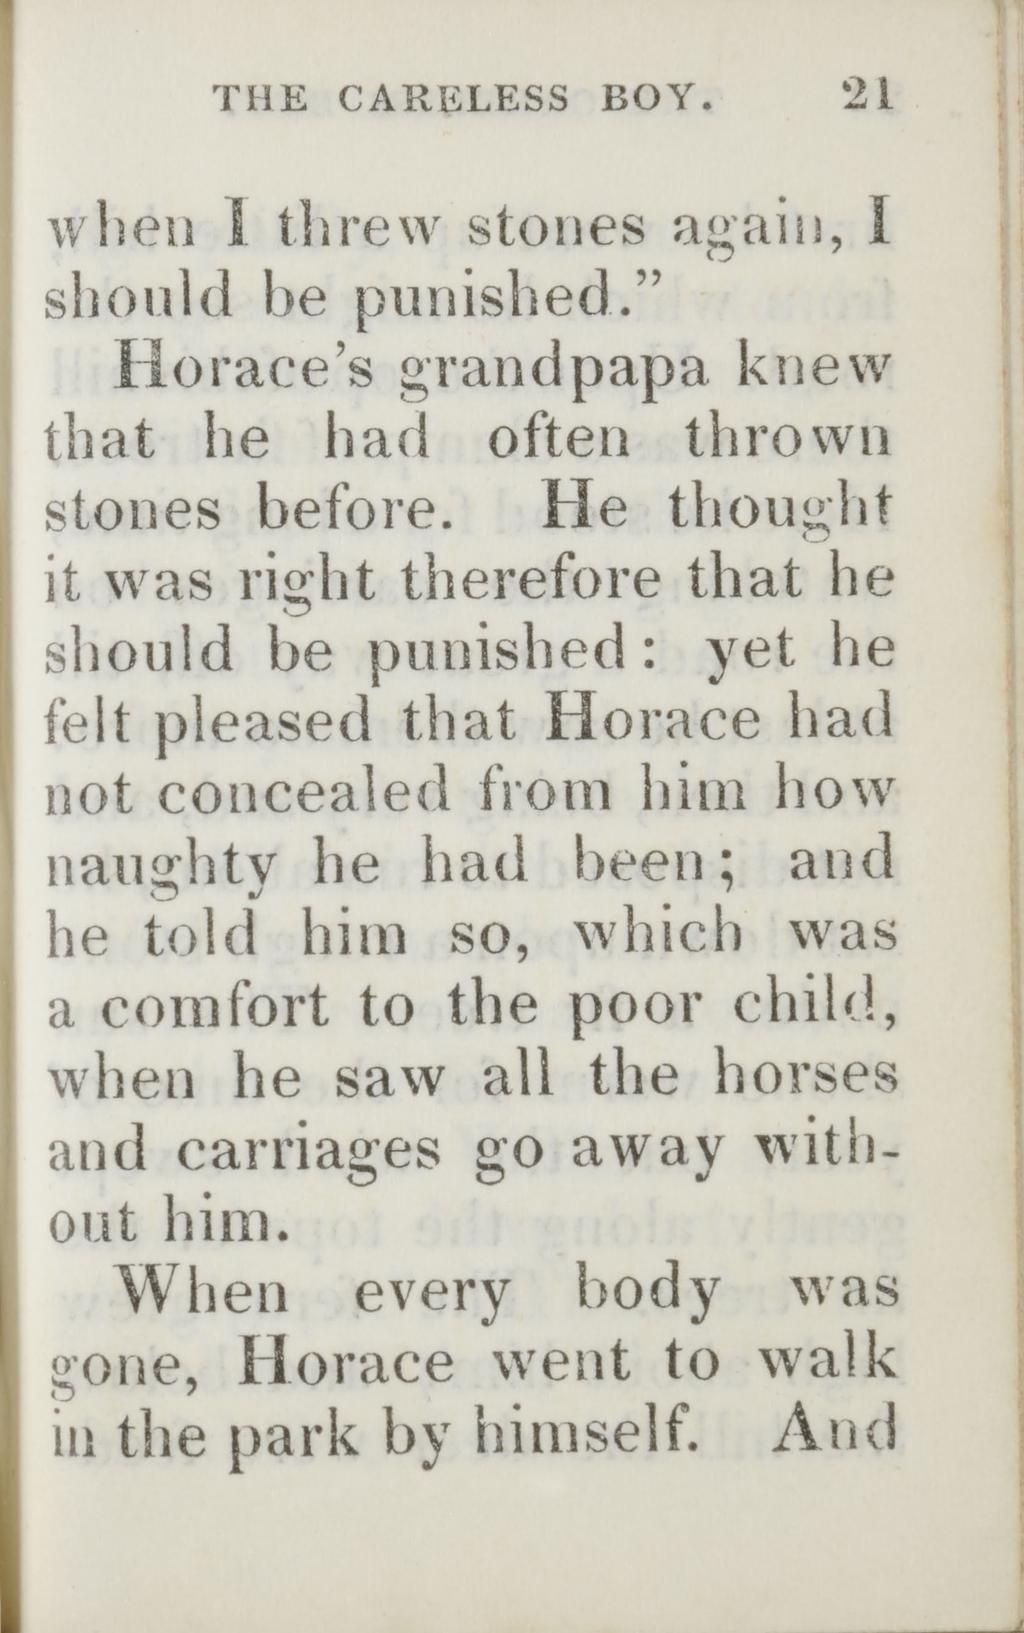 THE CARELESS BOY 21 when I threw stones again, I should be punished. Horace s grandpapa knew that he had often thrown stones before.